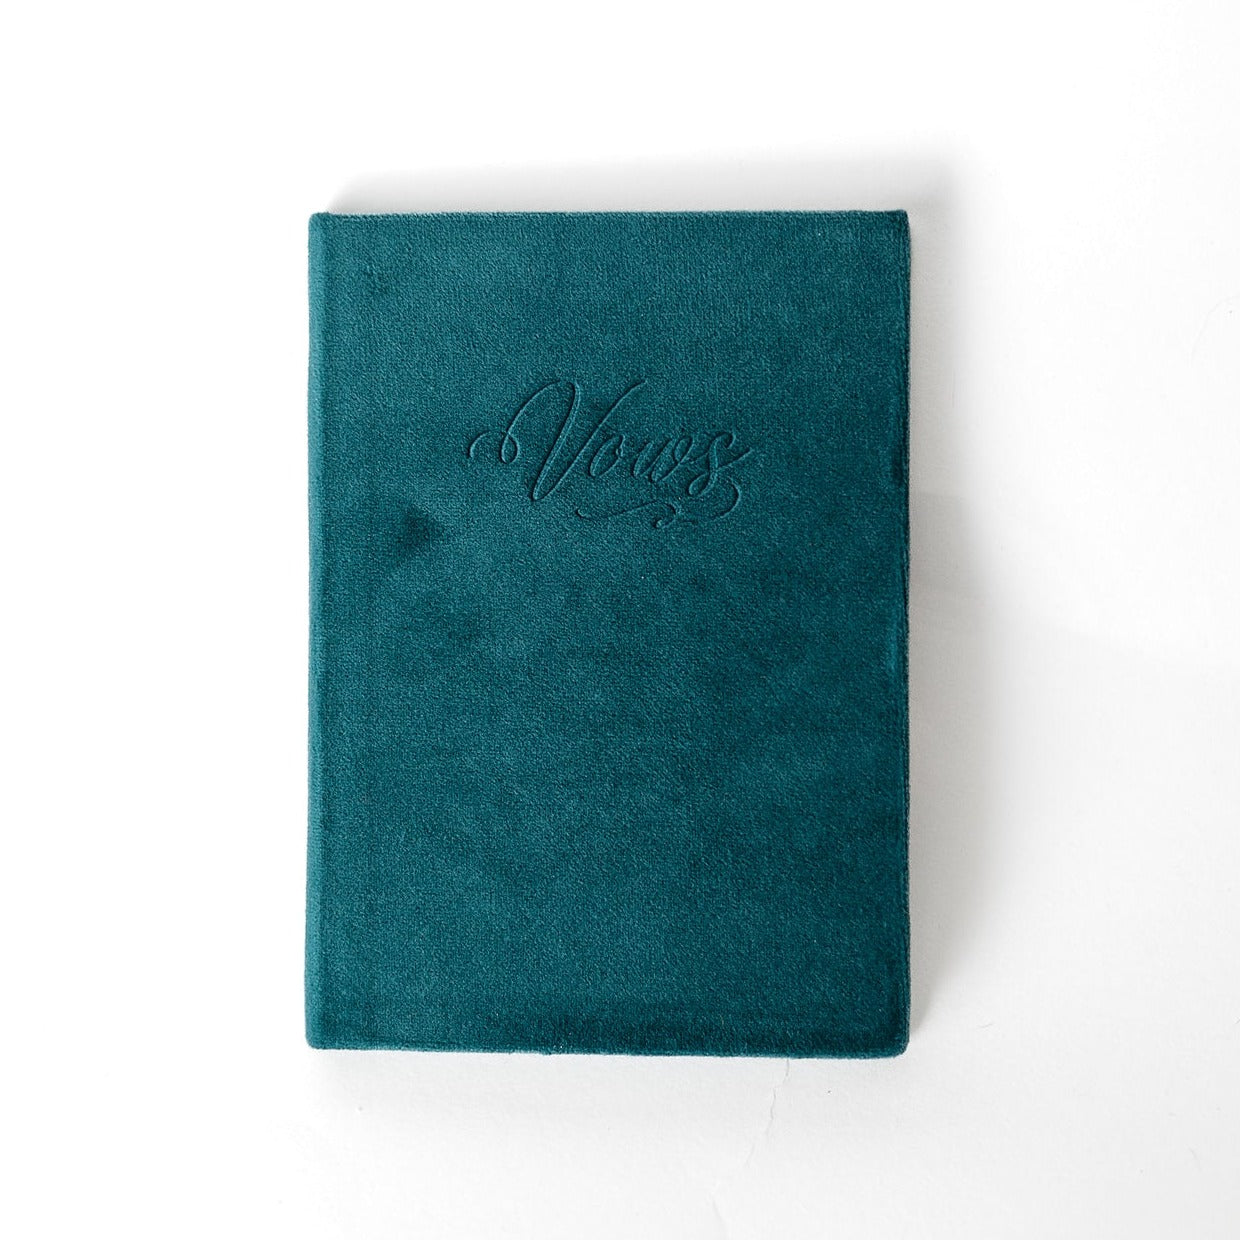 A teal vow book with the word "Vows" embossed on the front cover.